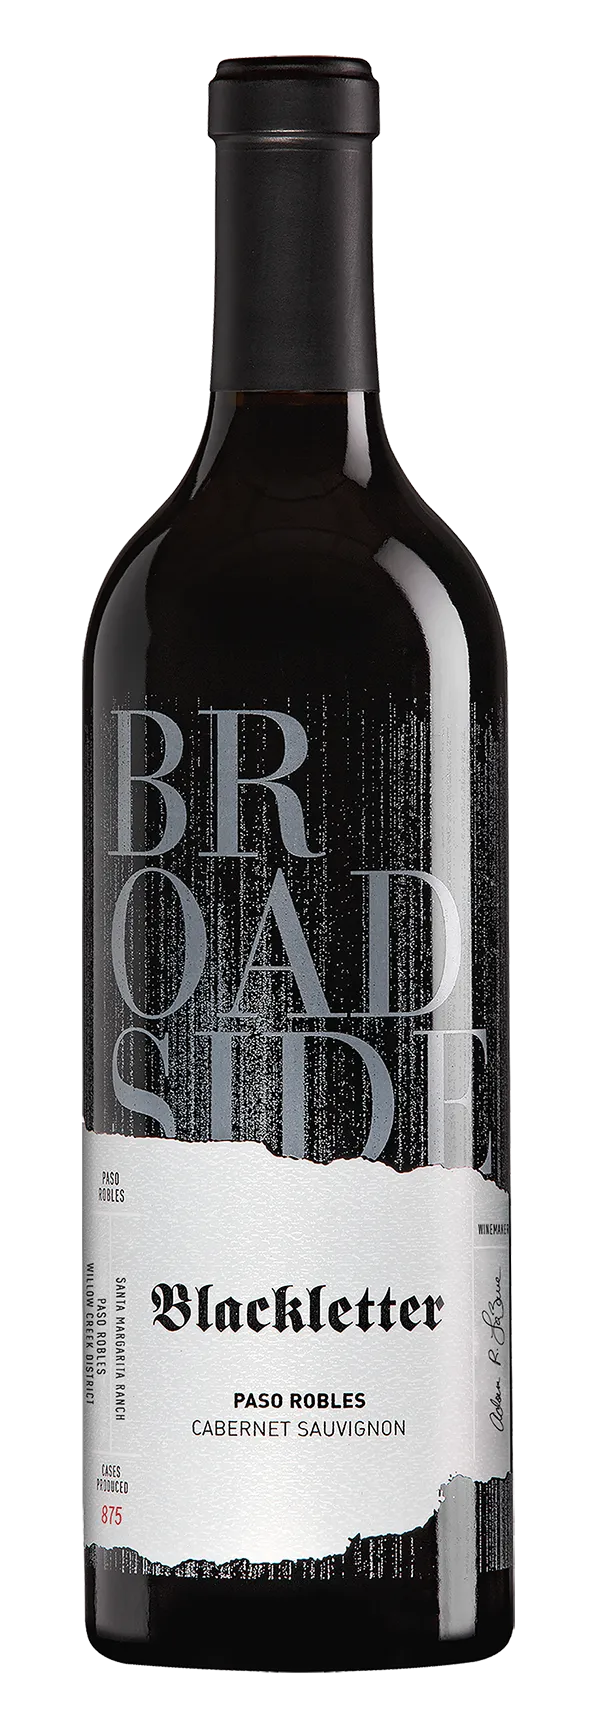 Bottle of Broadside Blackletter Cabernet Sauvignon from search results